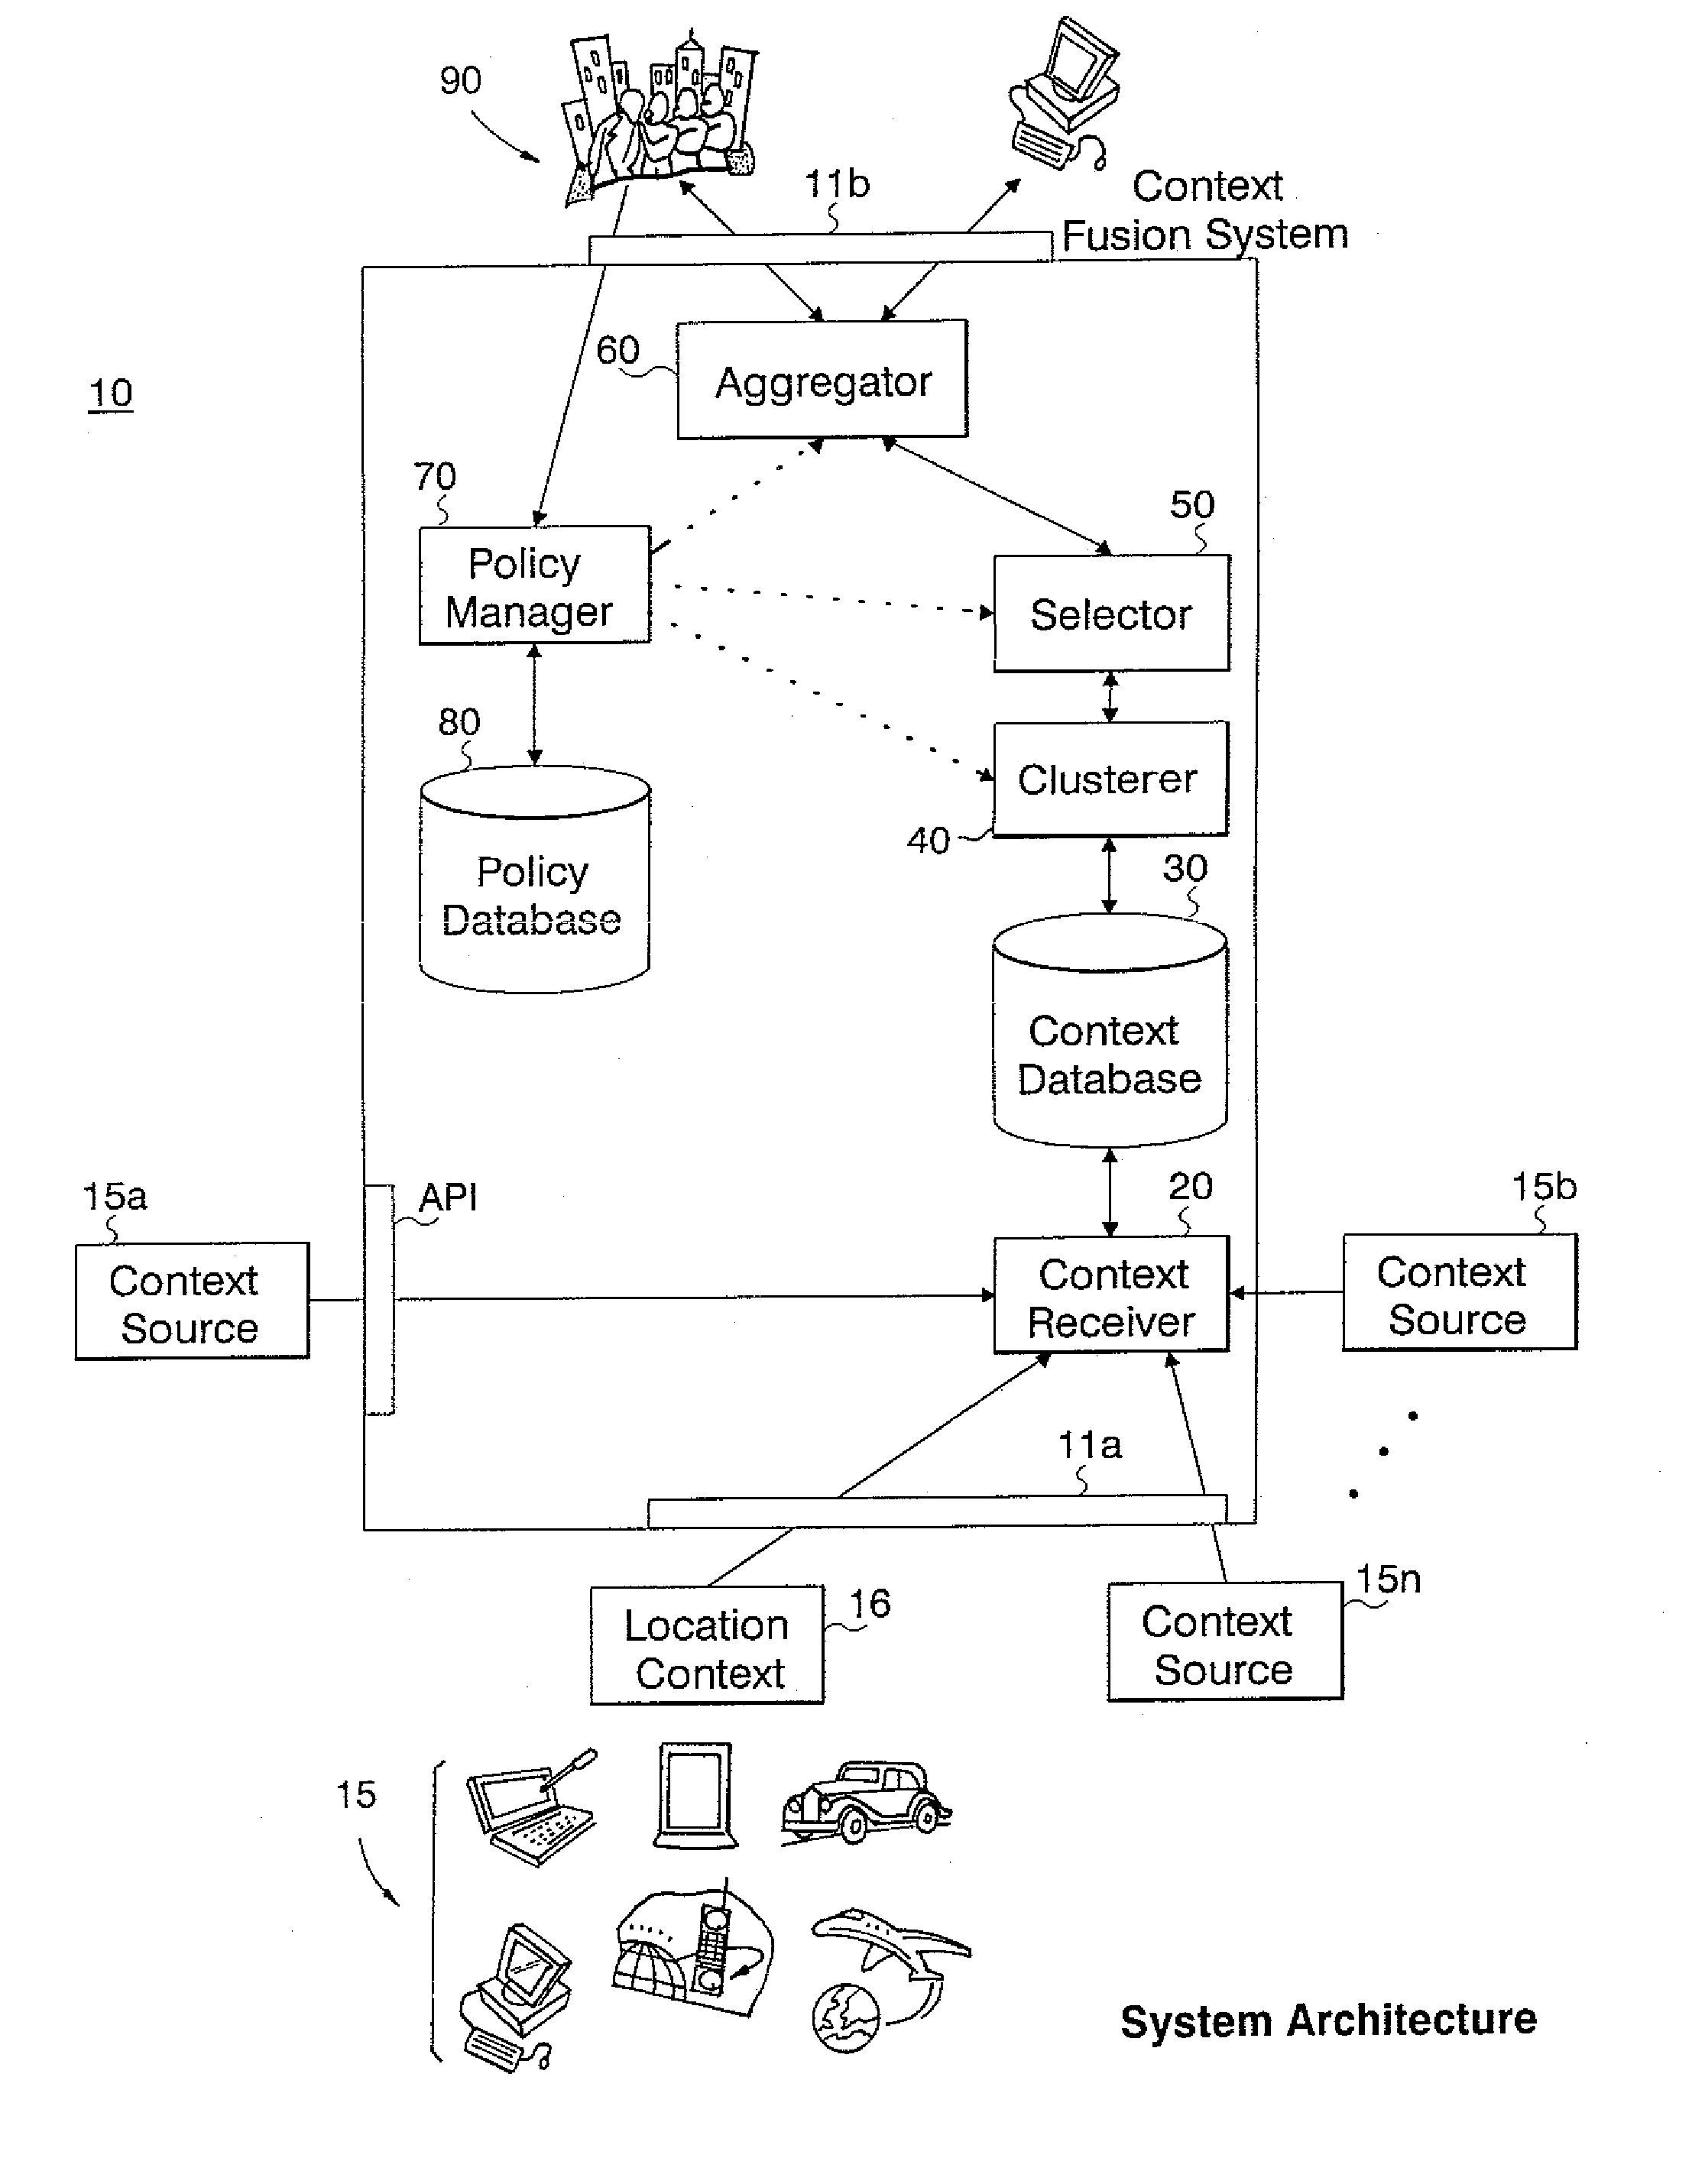 Method and apparatus for fusing context data